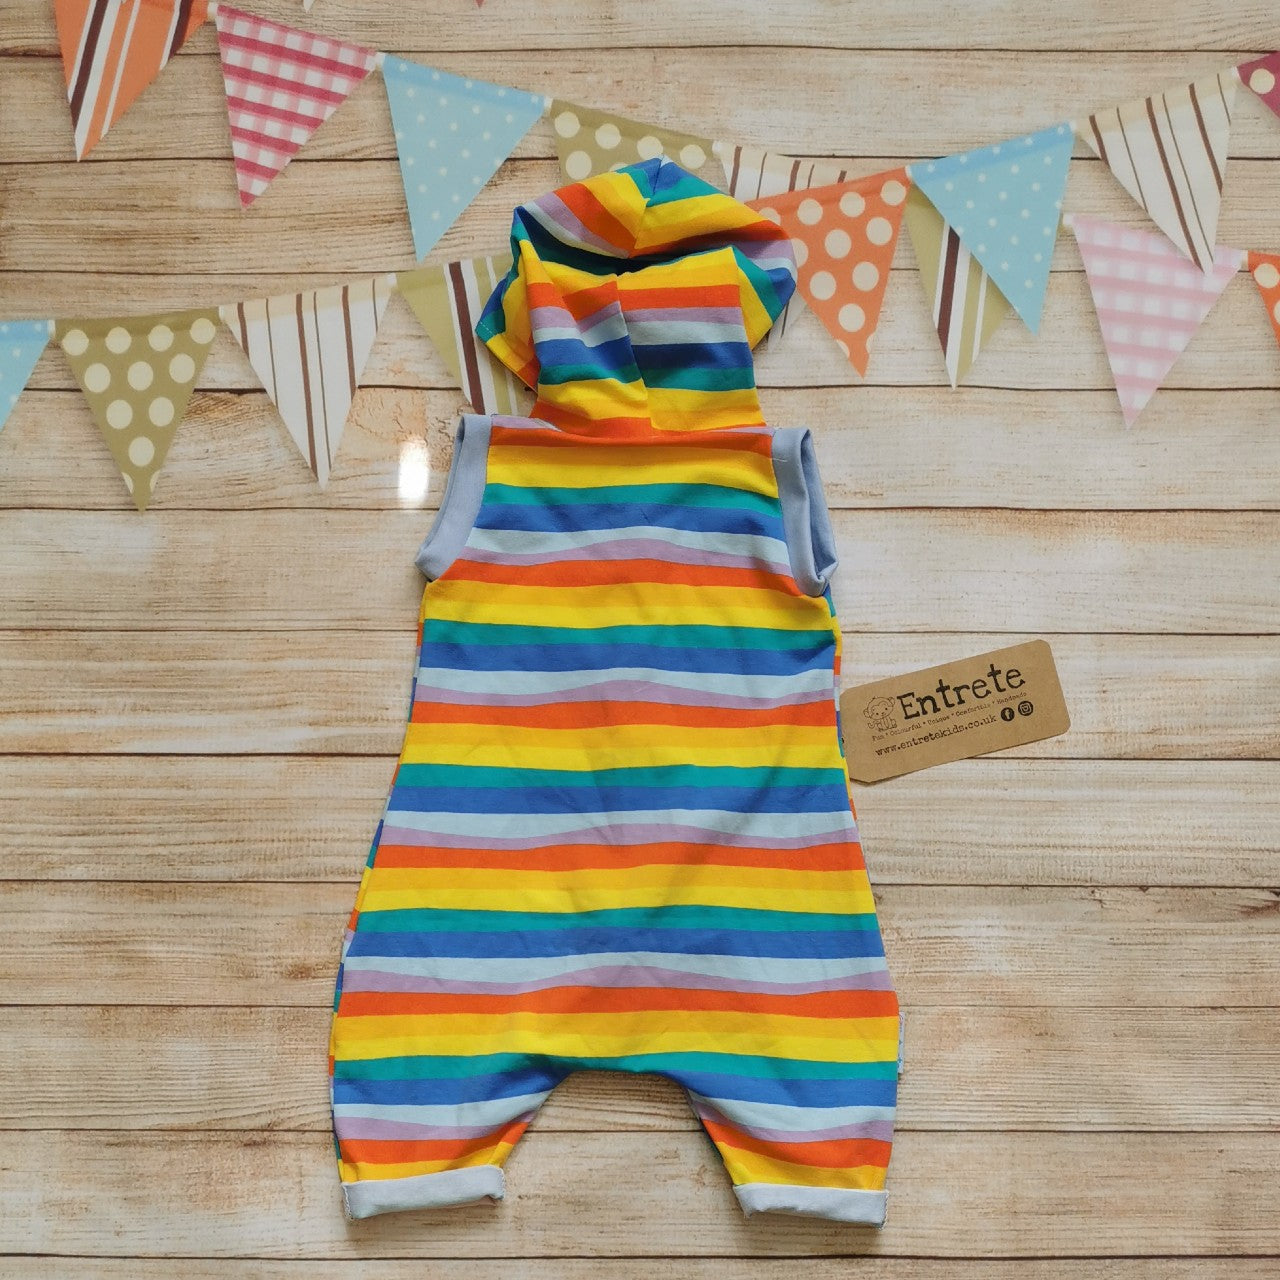 Back of Unisex Kids Hooded Bummie Romper, handmade in gorgeous red rainbow striped cotton jersey, with yellow organic cotton jersey hood lining and light blue cotton ribbing.